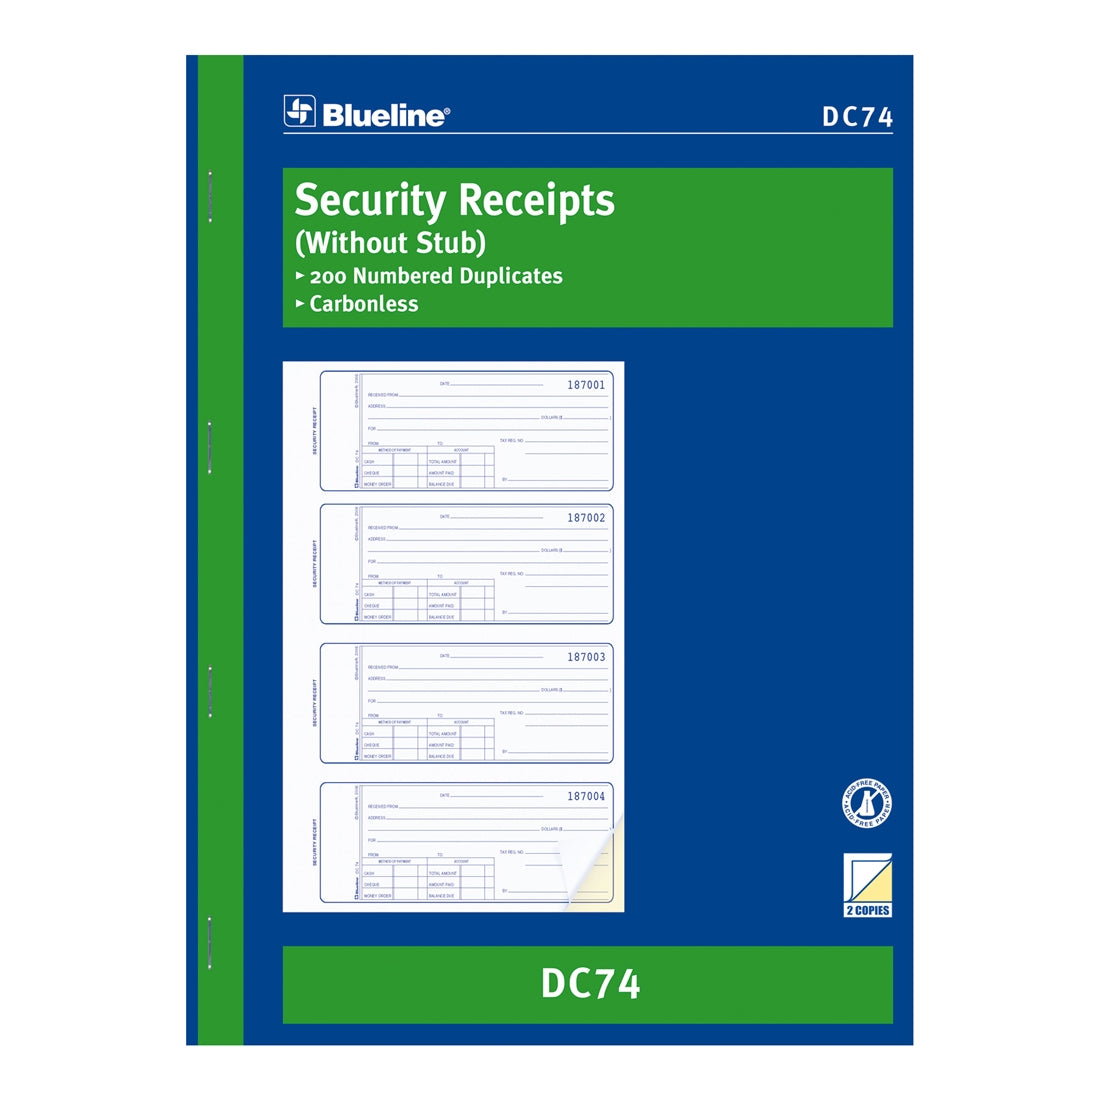 Security Receipts